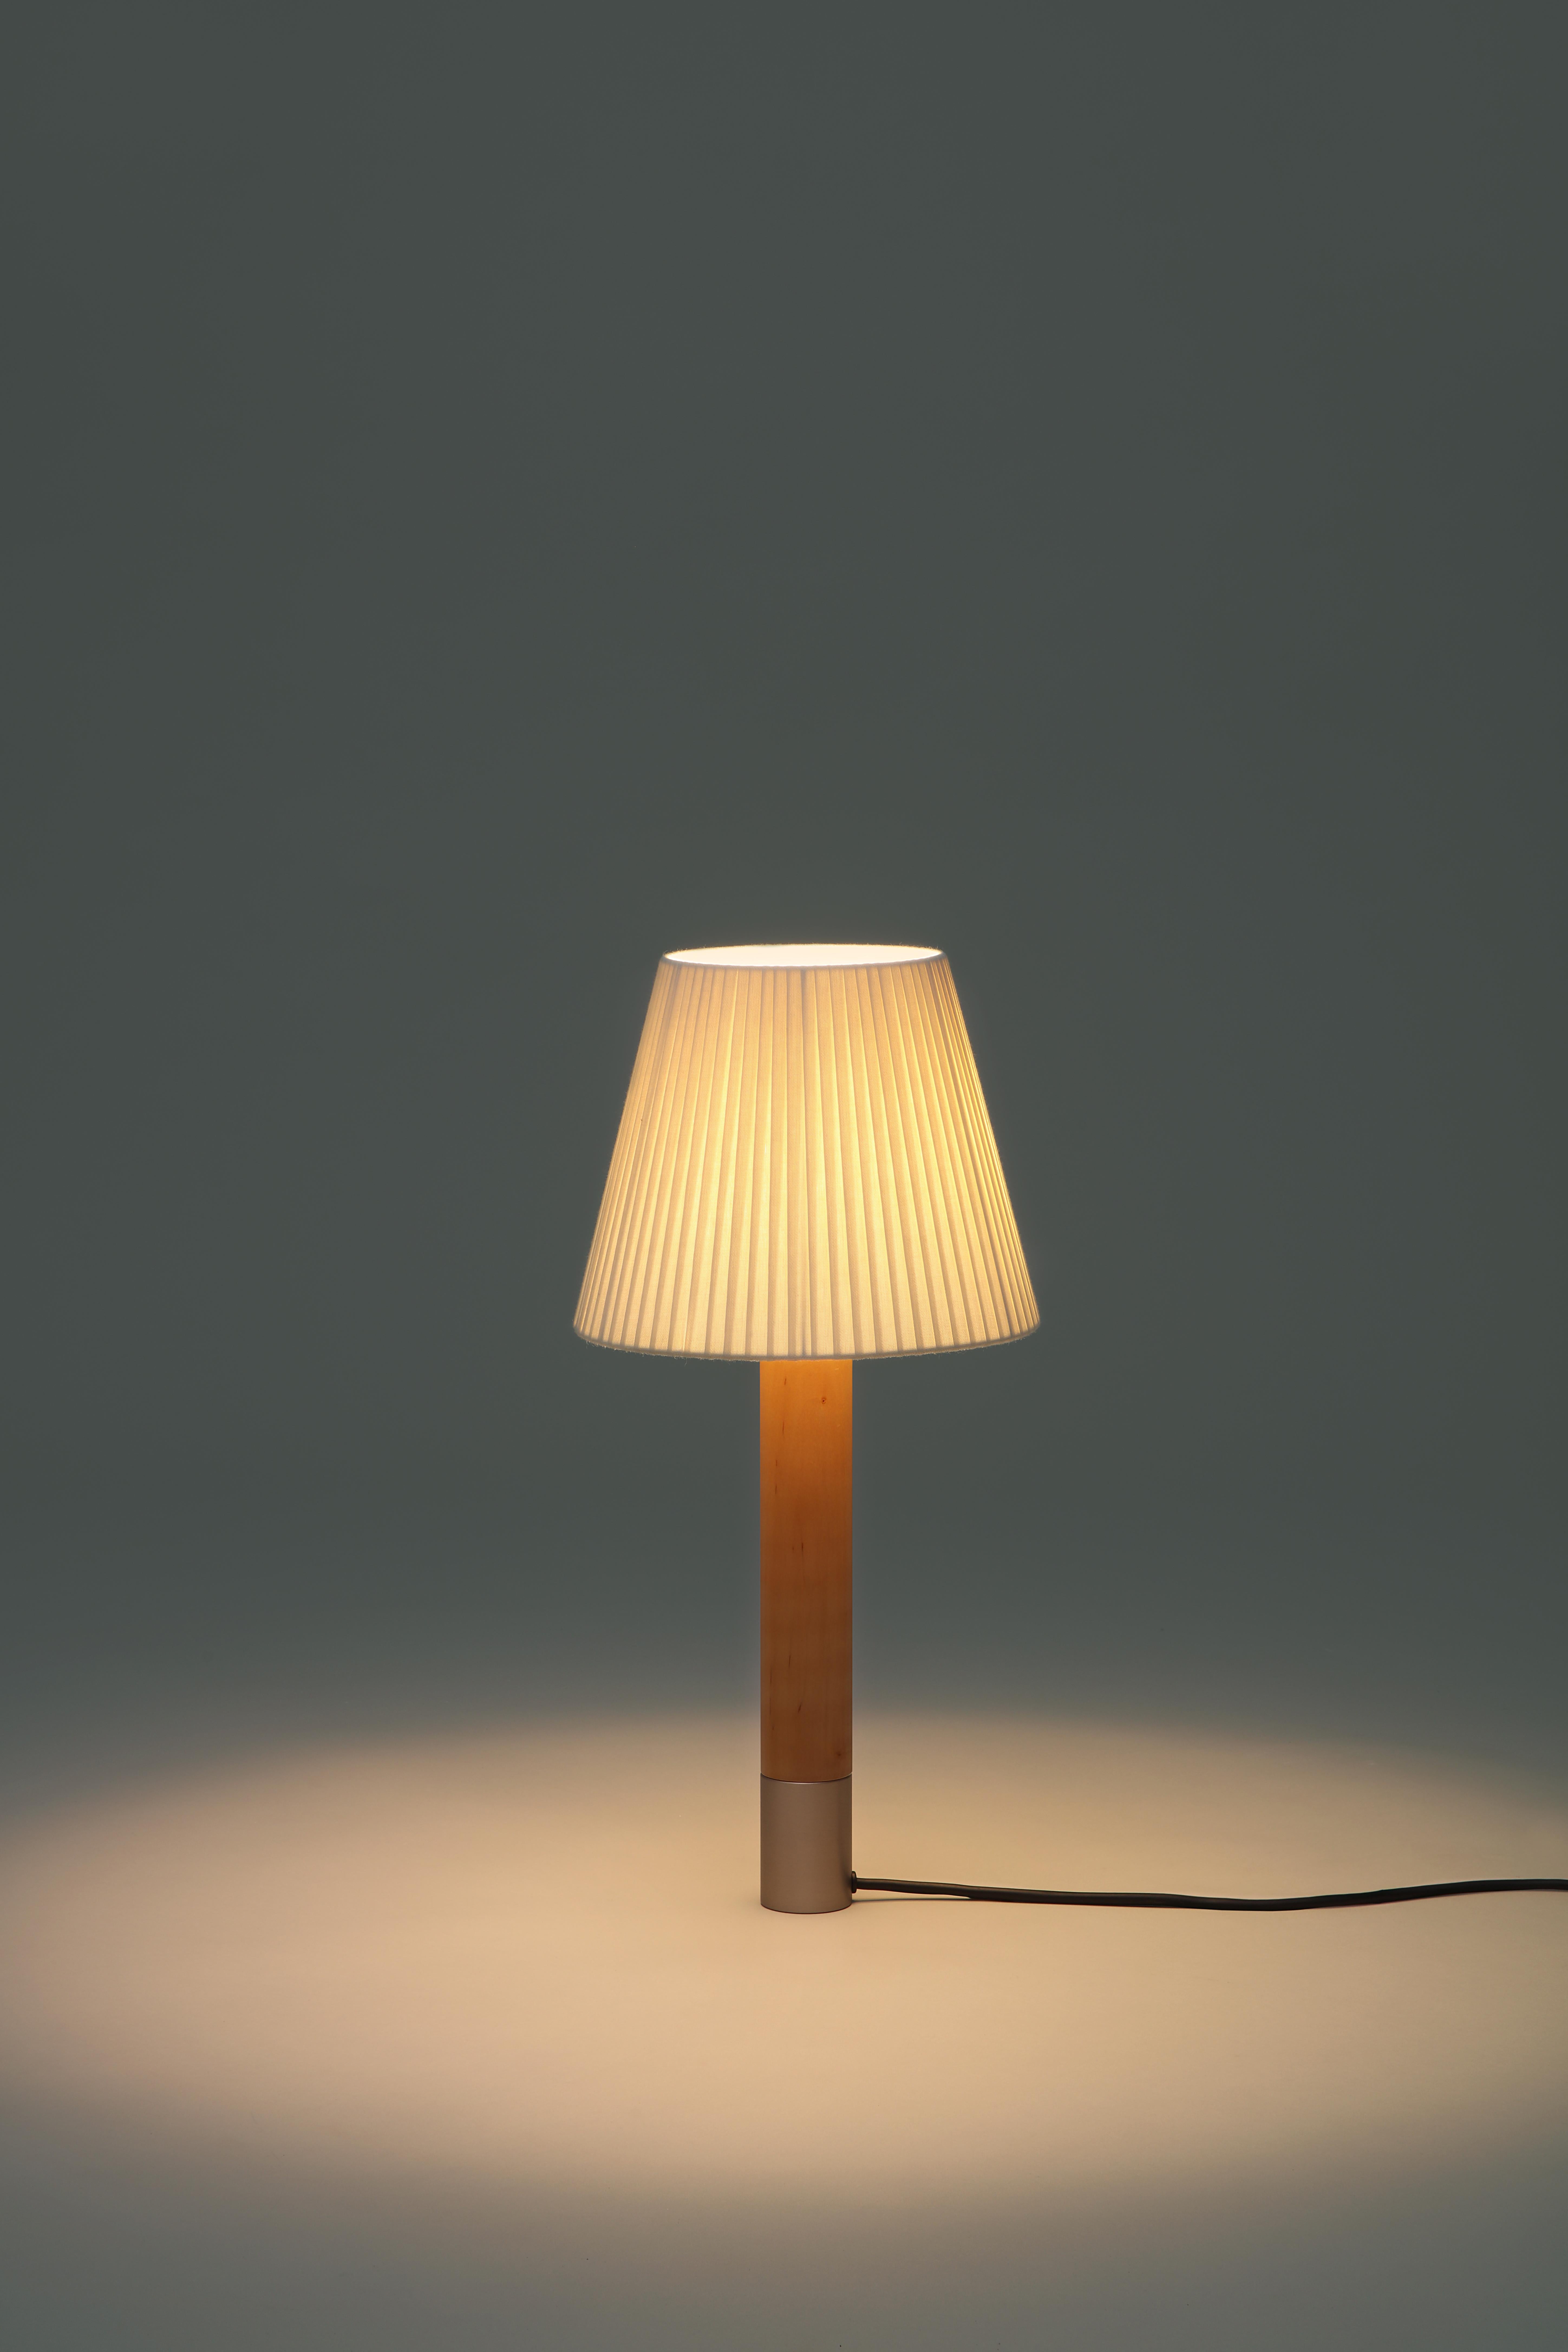 Spanish Bronze and Red Básica M1 Table Lamp by Santiago Roqueta, Santa & Cole For Sale